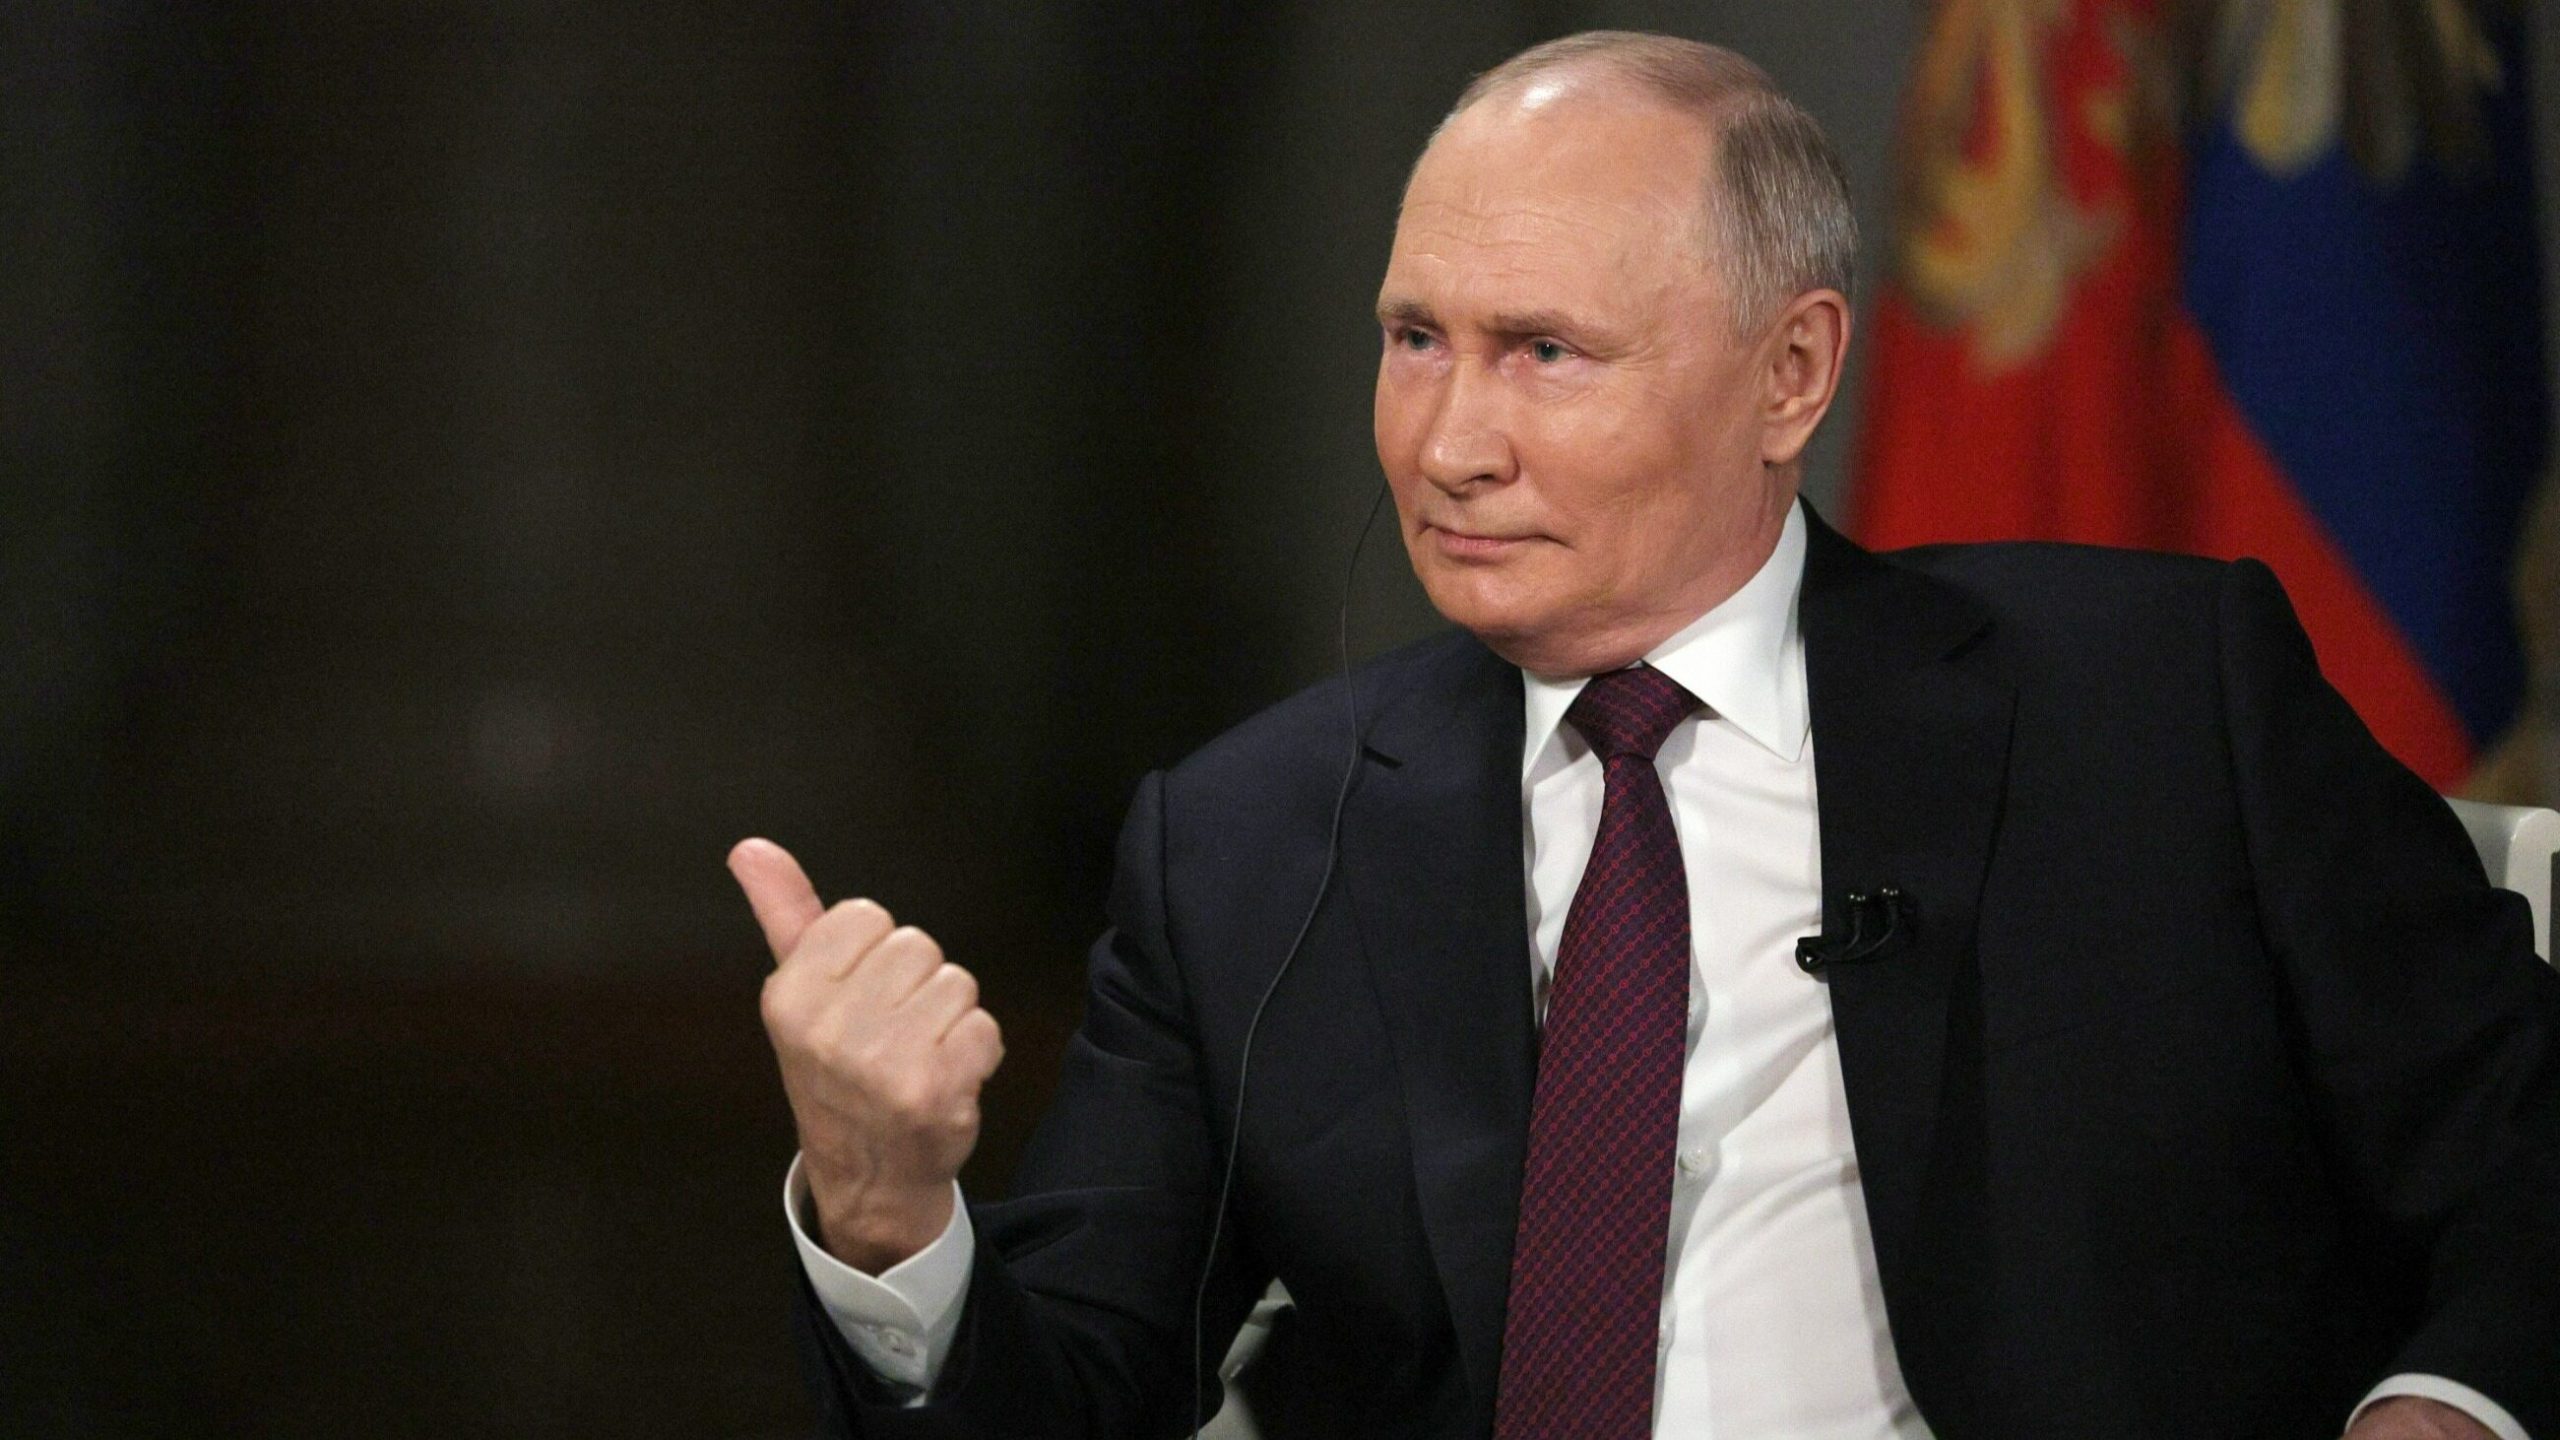 The Polish Ministry of Foreign Affairs responds to Vladimir Putin's interview.  10 lies exposed